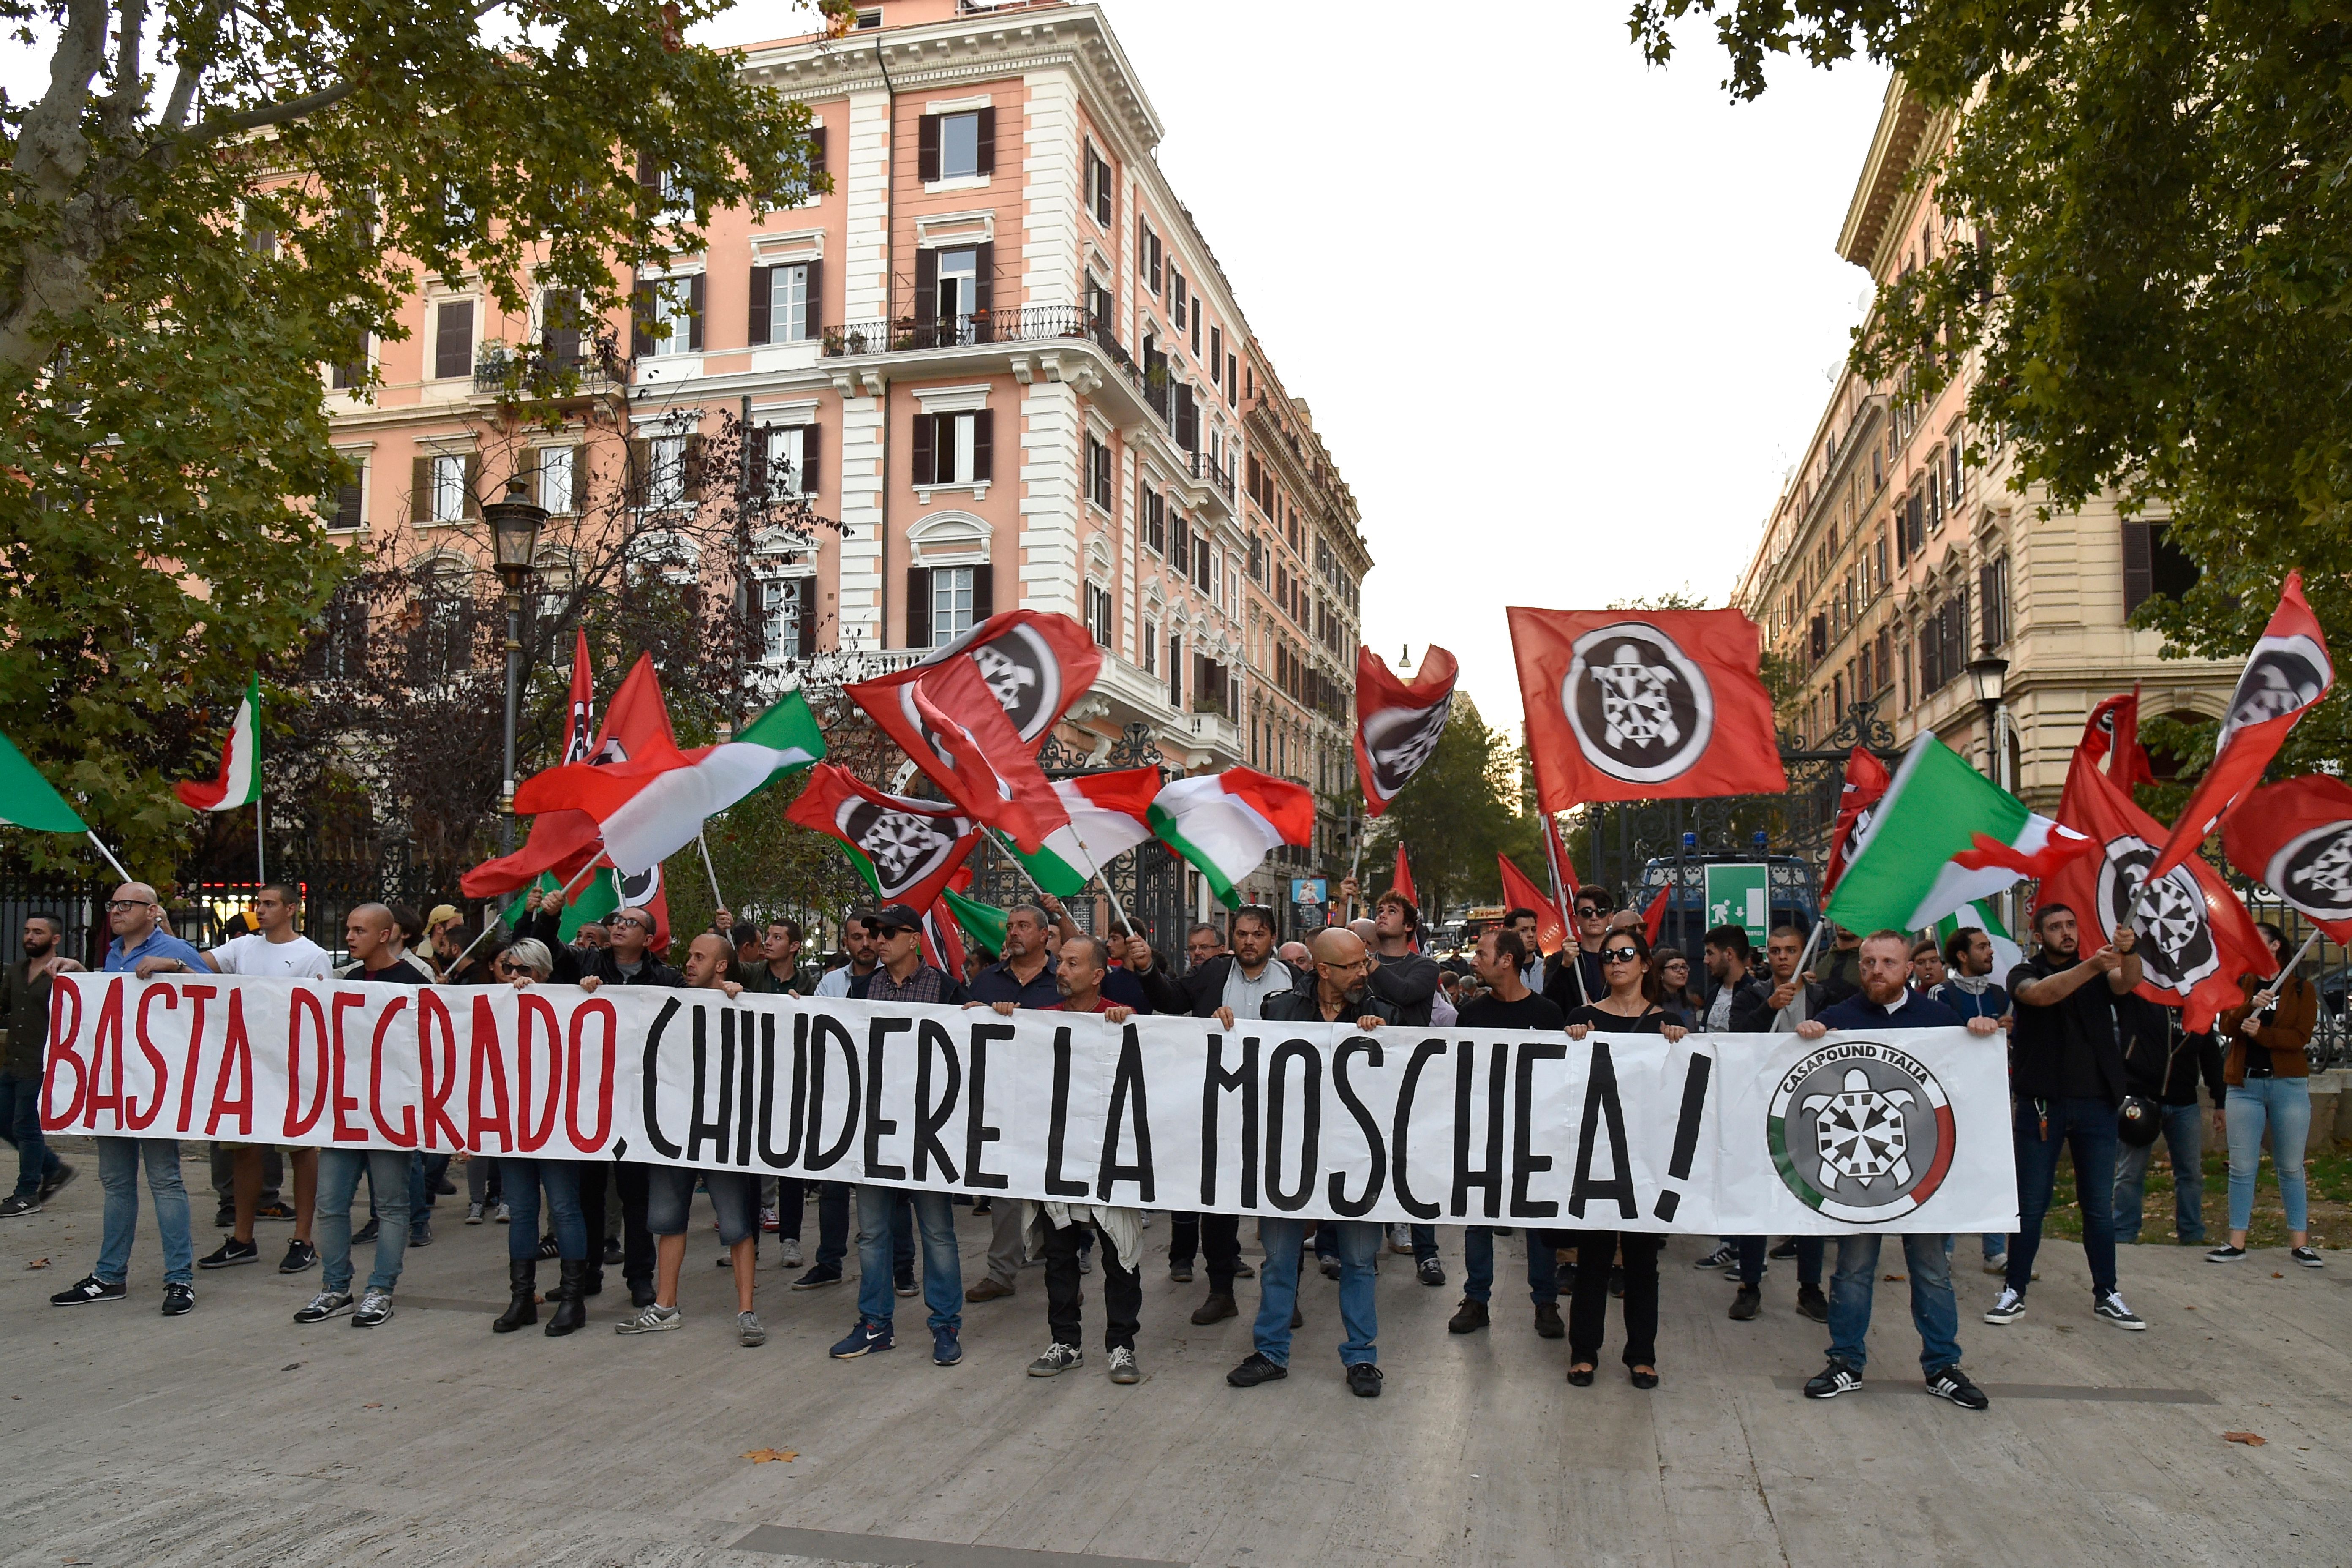 Supporters of Italian far-right movement CasaPound march behind a banner reading "Enough deterioration, Close the Mosque" during a protest against a mosque situated in Via San Vito on October 4, 2017 in the Esquilino district of Rome. / AFP PHOTO / Andreas SOLARO (Photo credit should read ANDREAS SOLARO/AFP/Getty Images)